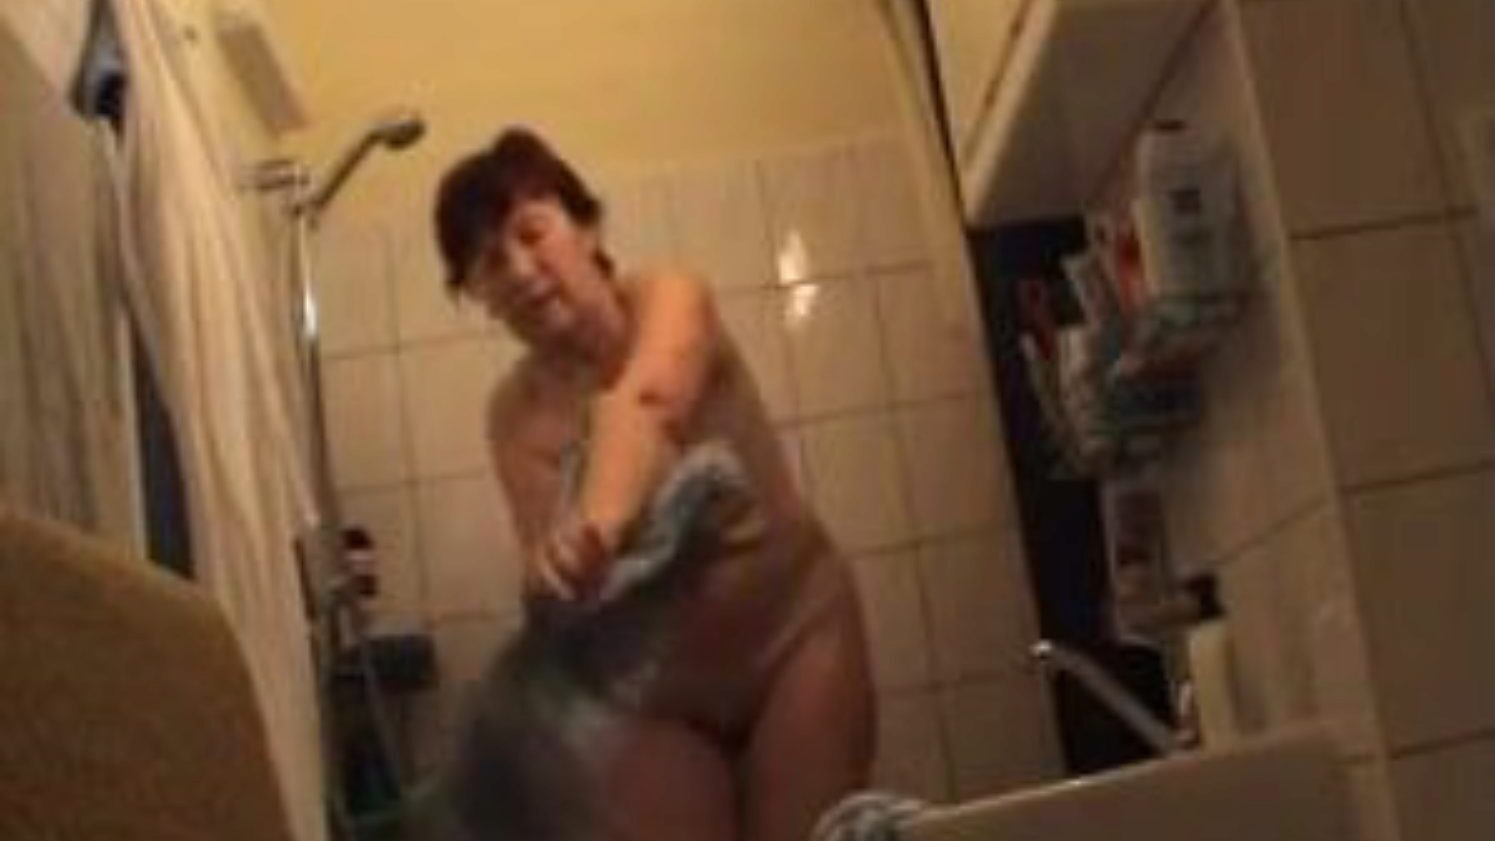 German Granny Nude in Bathroom, Free Germans Porn Video ad Watch German Granny Nude in Bathroom movie scene on xHamster, the largest sex tube site with tons of free Germans Naked Granny & Mature porno vids